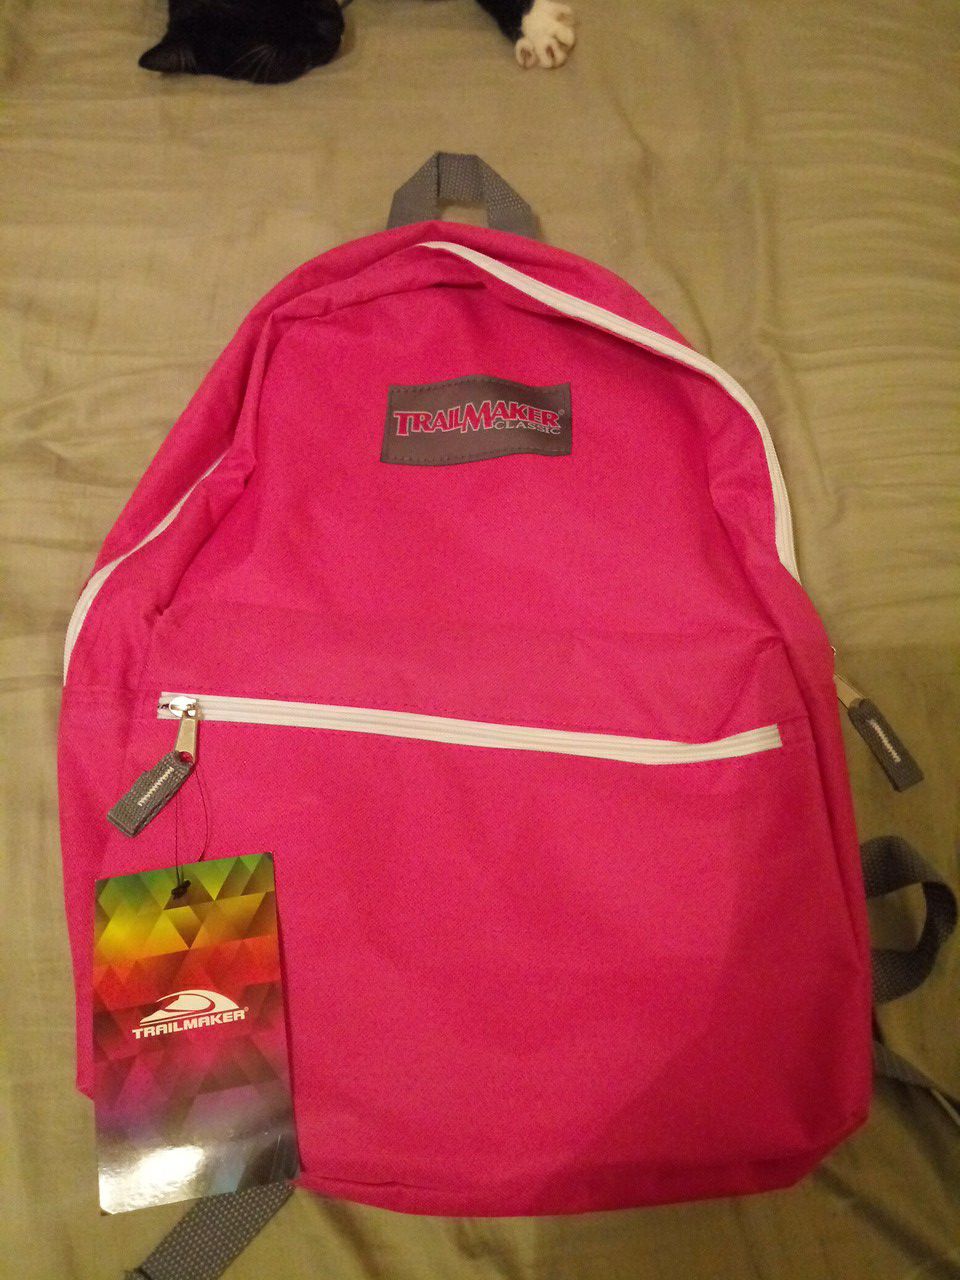 Brand new pink backpack